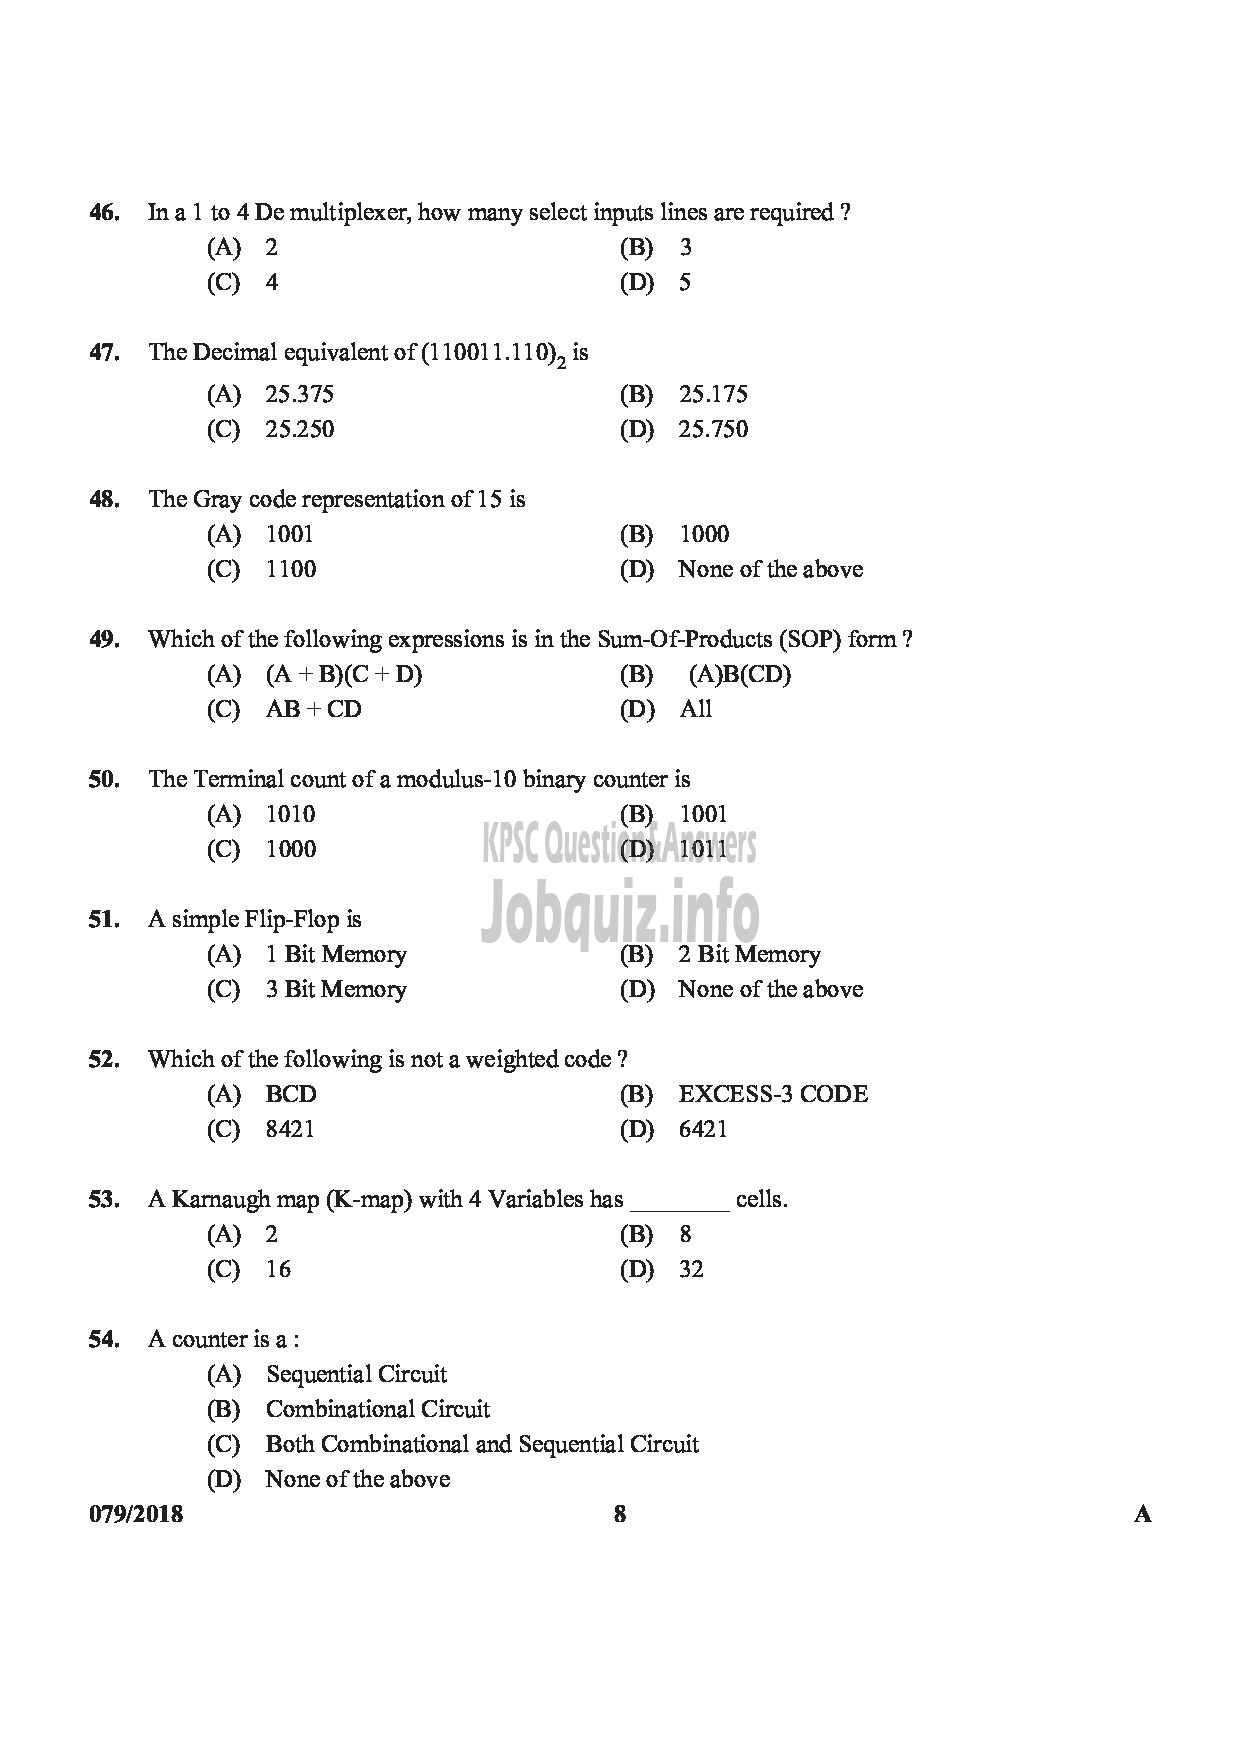 Kerala PSC Question Paper - JUNIOR INSTRUCTOR ELECTRONIC MECHANIC INDUSTRIAL TRAINING-8